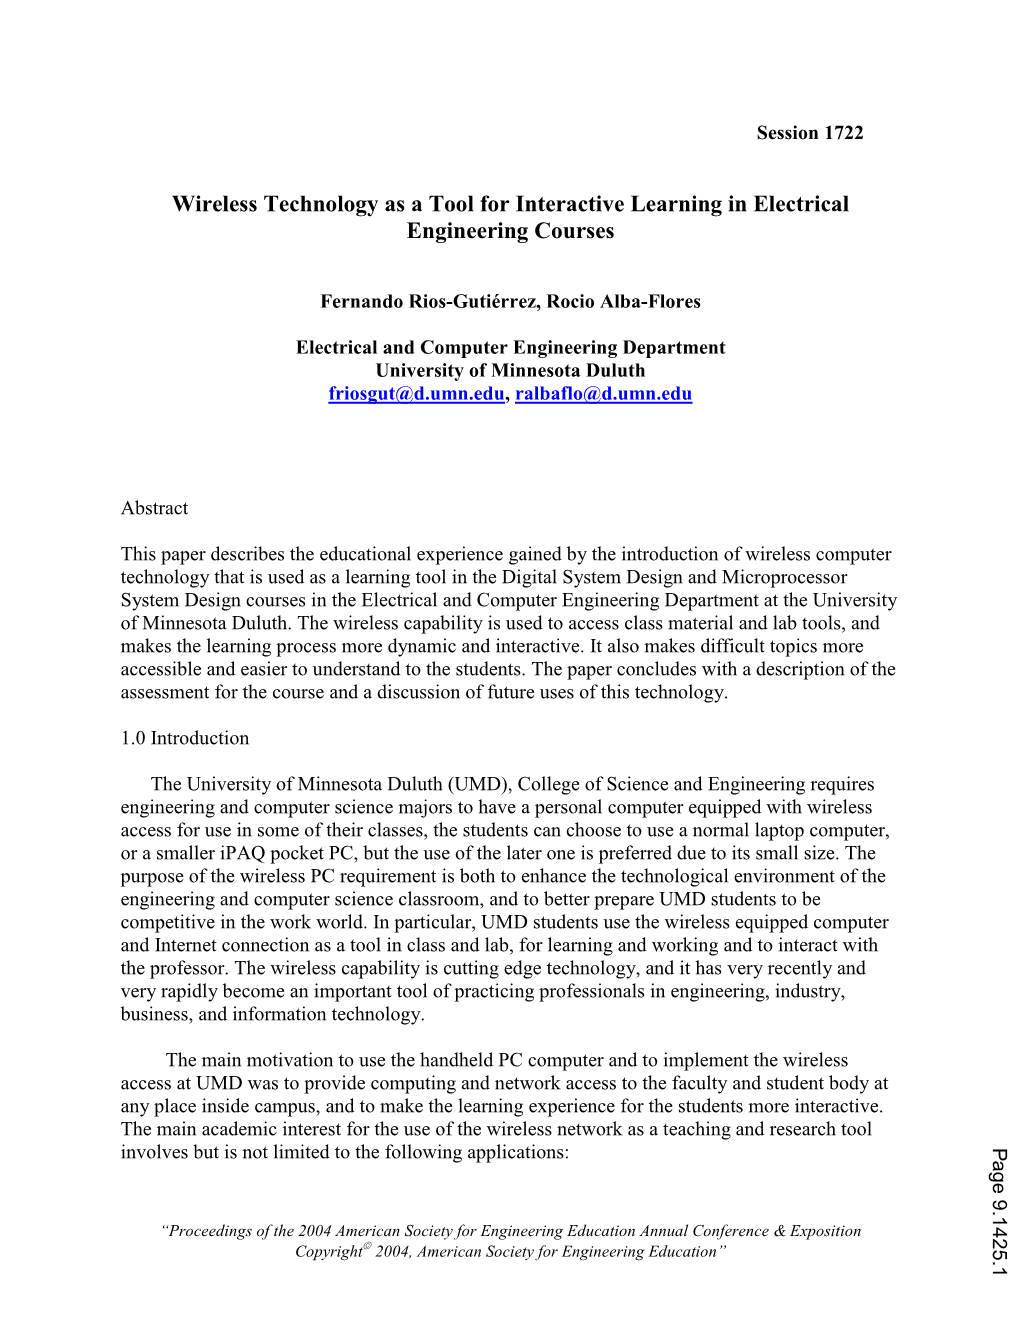 Wireless Technology As a Tool for Interactive Learning in Electrical Engineering Courses